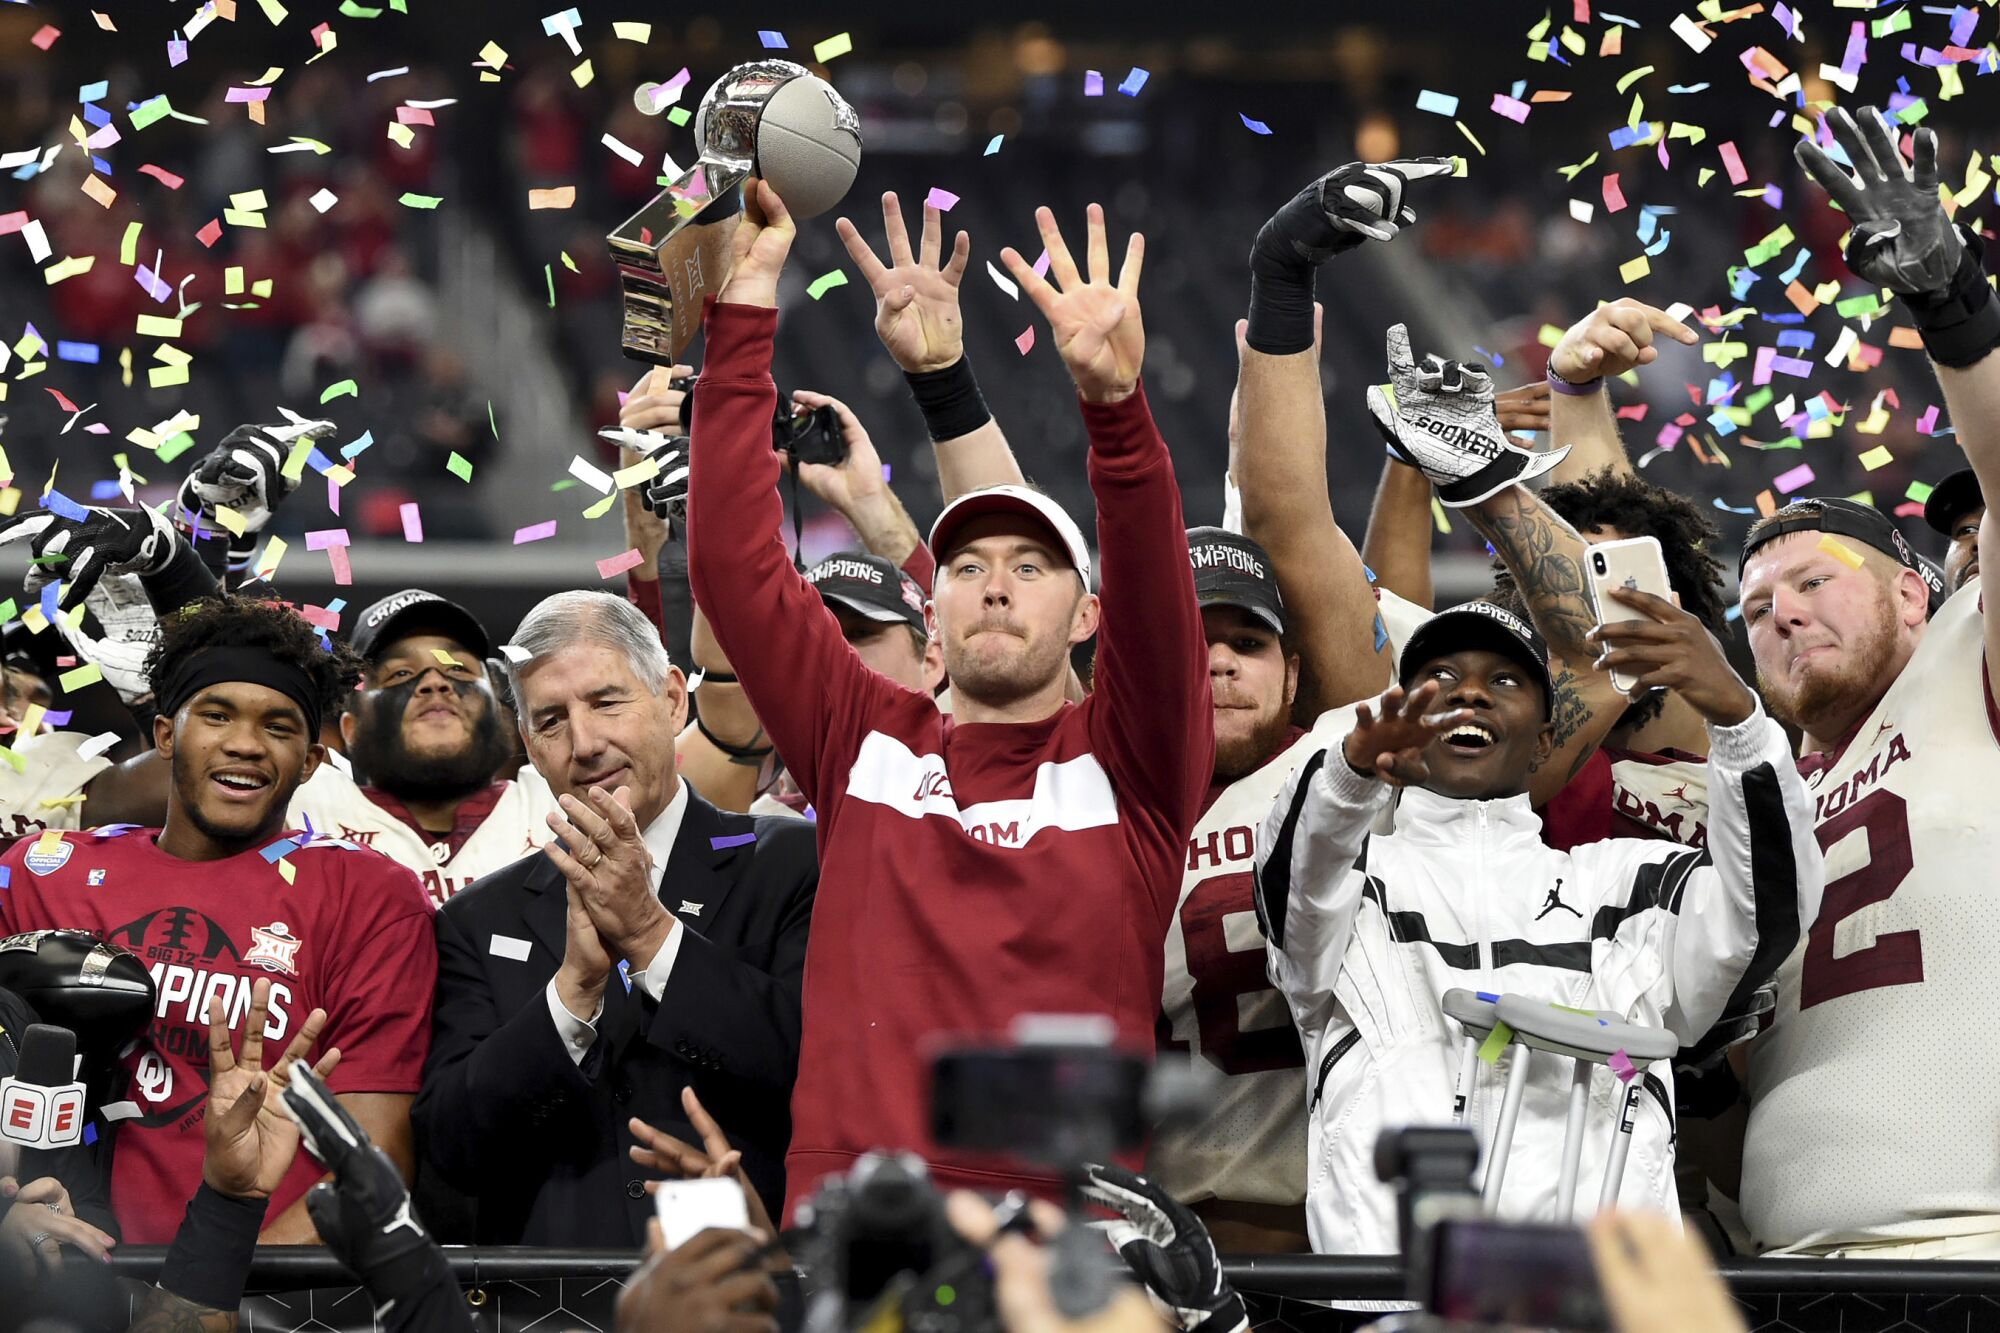 Oklahoma coach Lincoln Riley holds up the Big 12 championship trophy after beating Texas in 2018